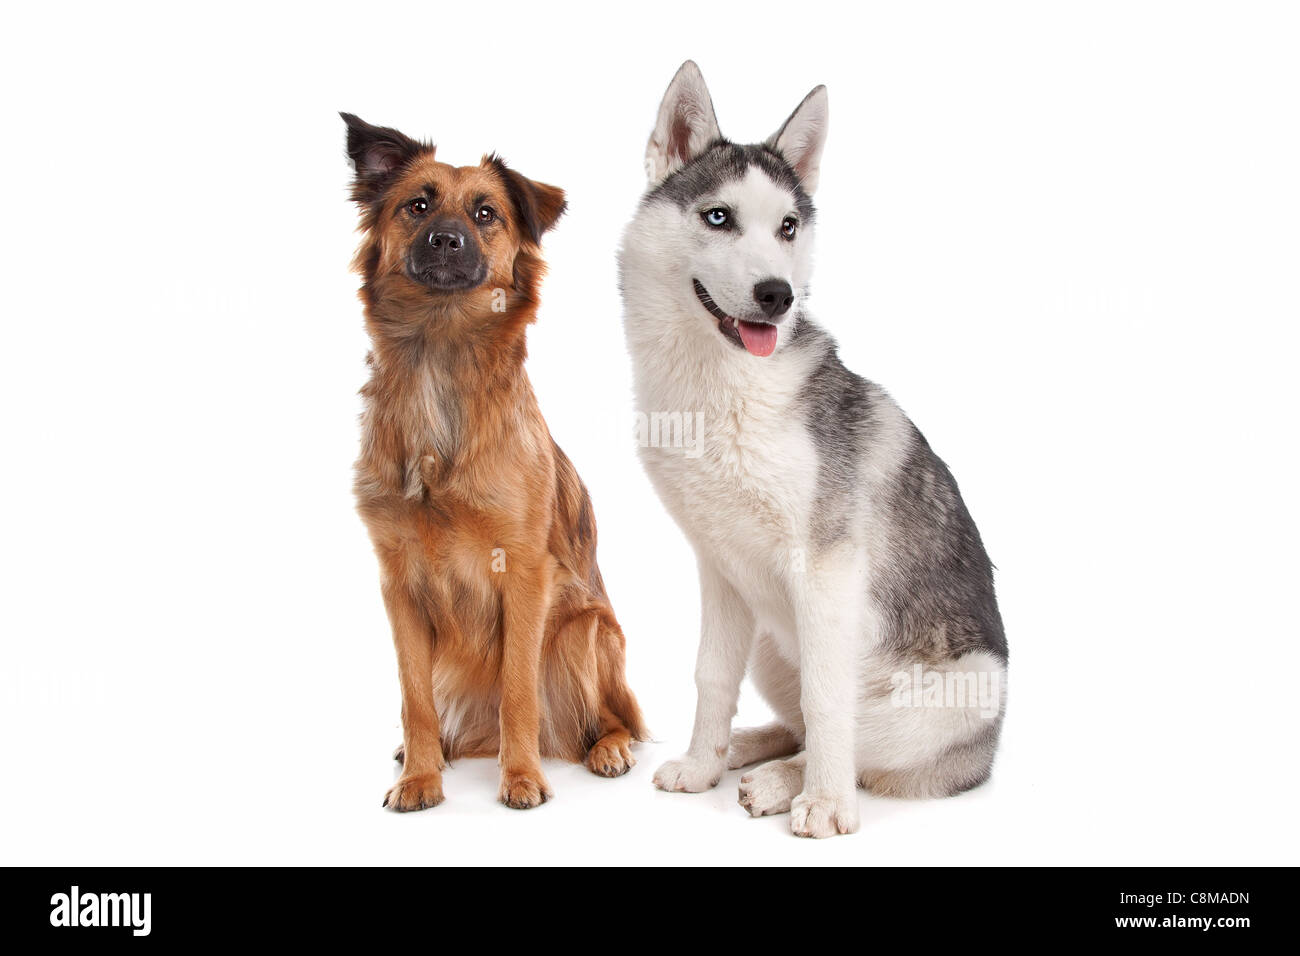 Siberian Husky puppy and a mixed breed dog in front of a white background Stock Photo